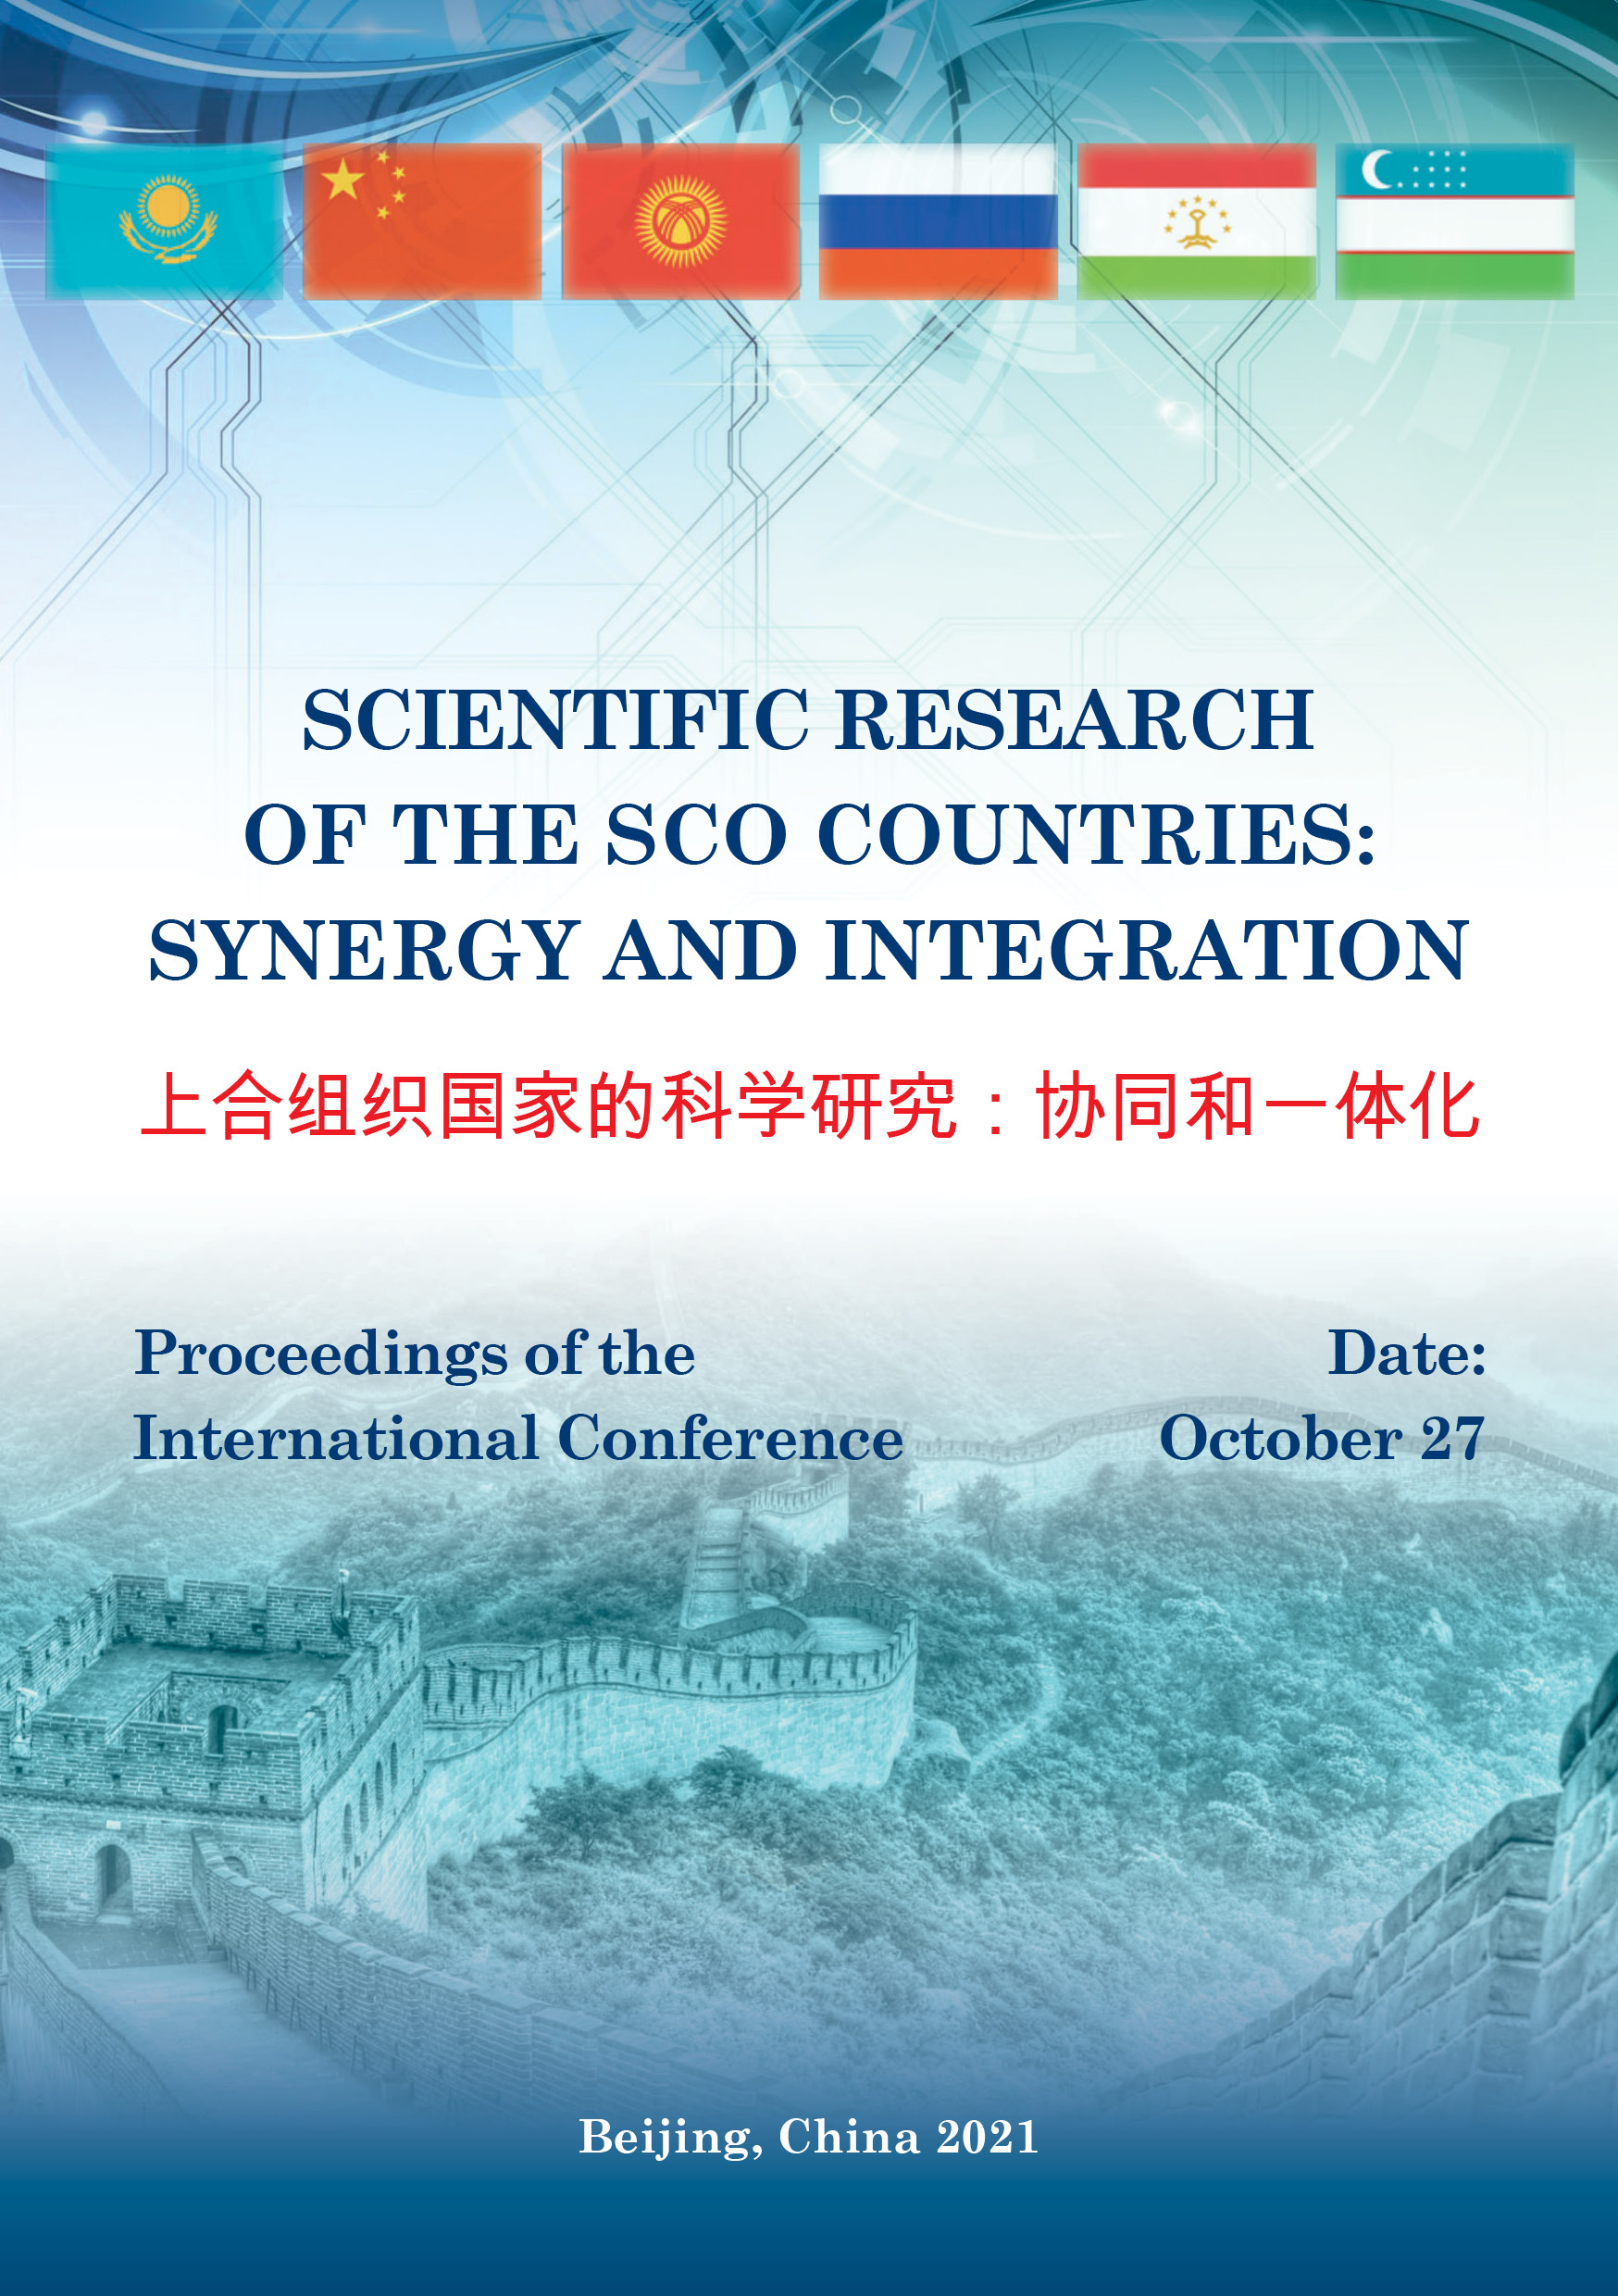             SCIENTIFIC RESEARCH OF THE SCO COUNTRIES: SYNERGY AND INTEGRATION. OCTOBER 27, 2021. BEIJING, PRC. PART 2.
    